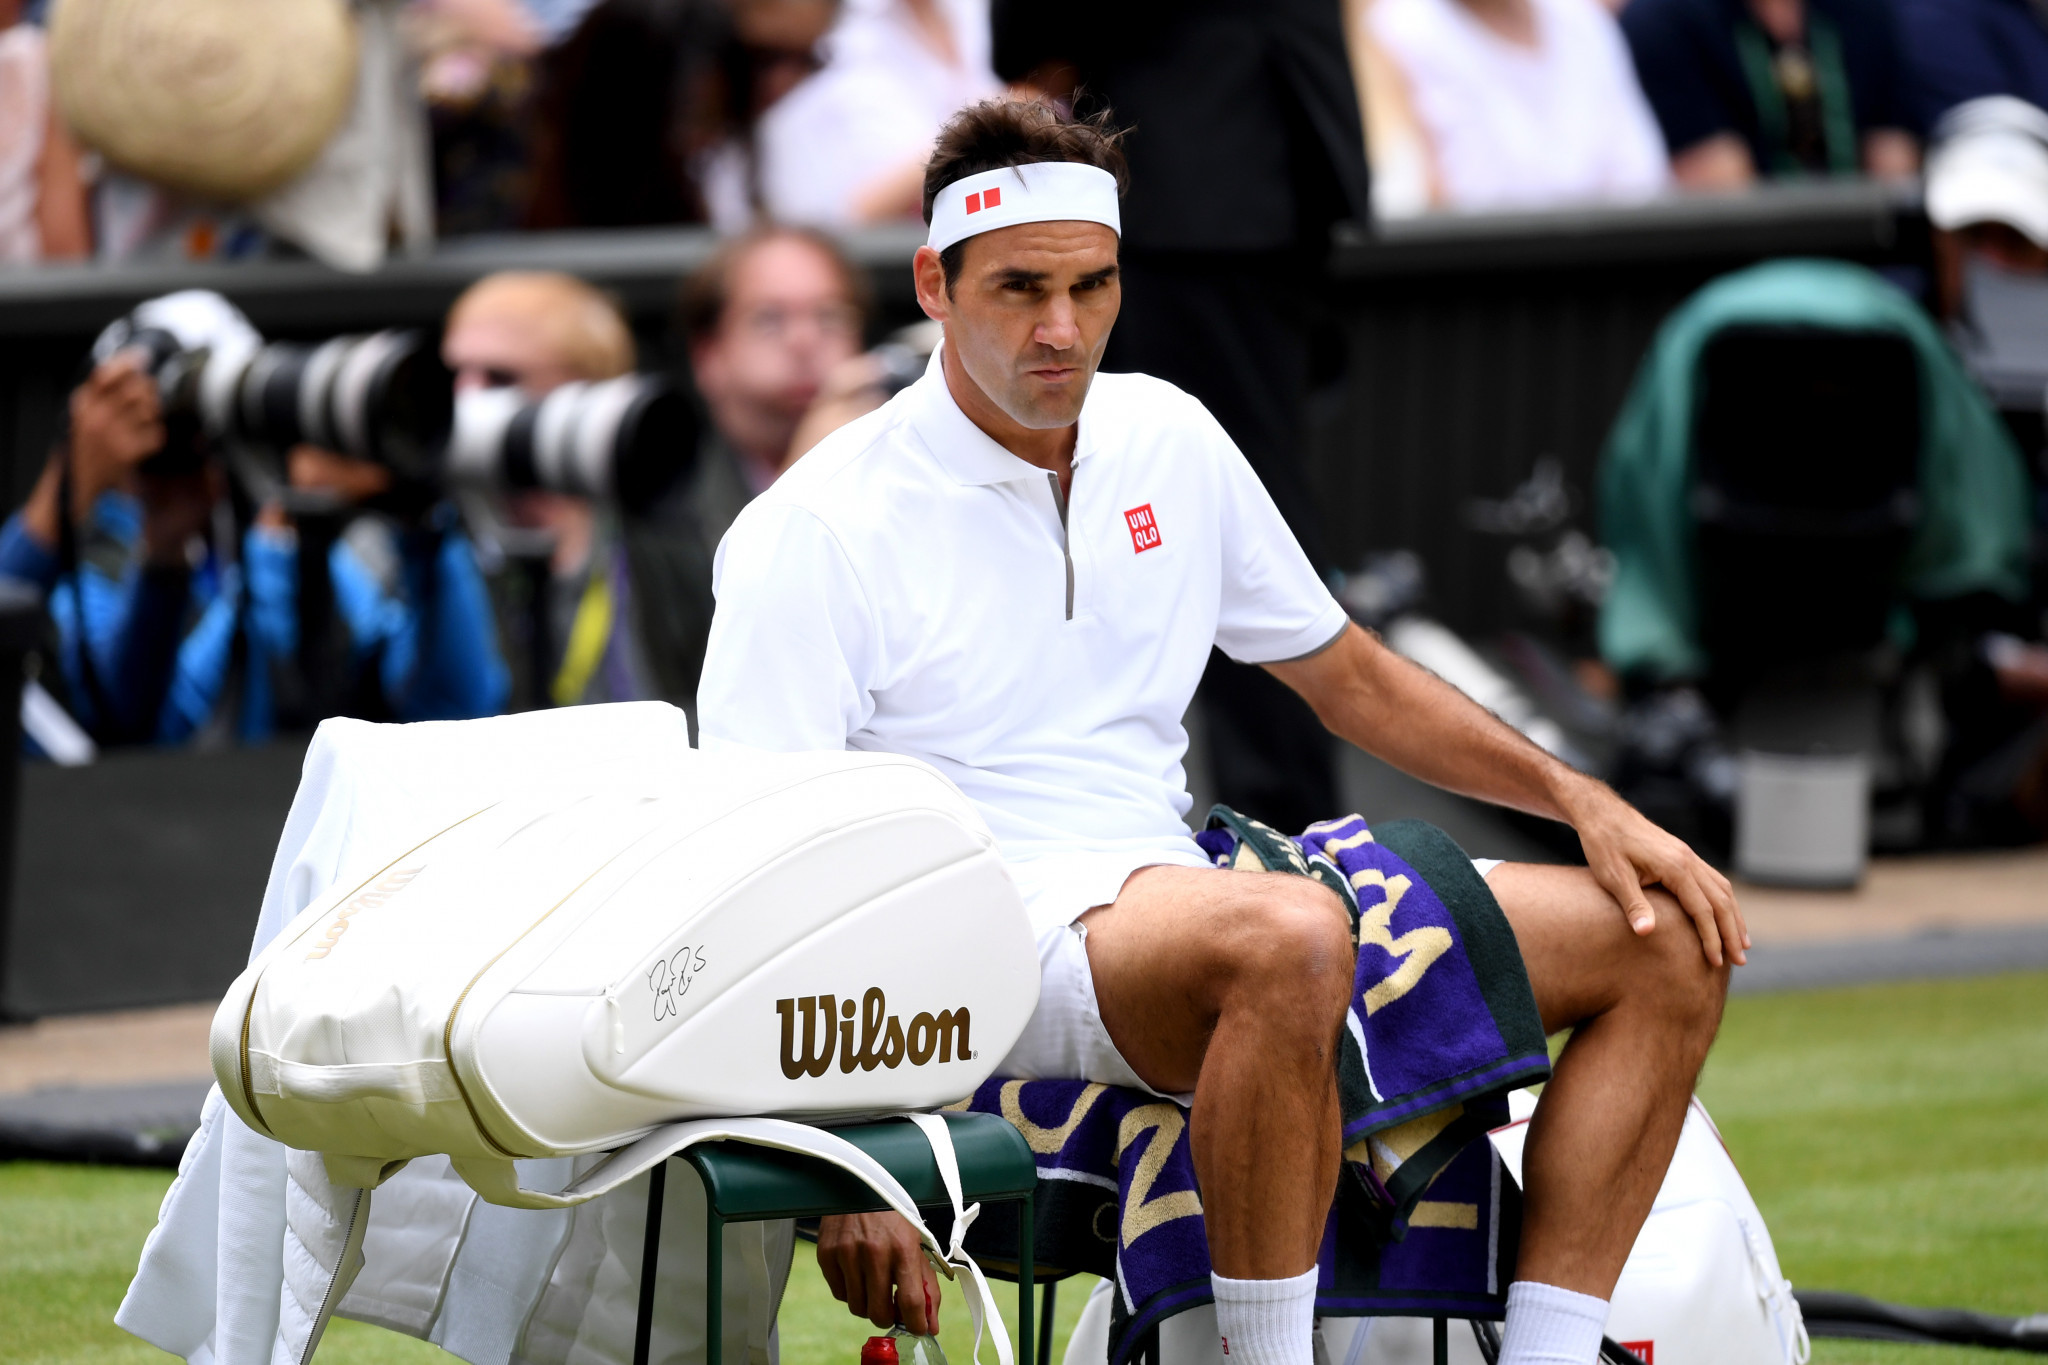 Federer takes a break in between games ©Getty Images